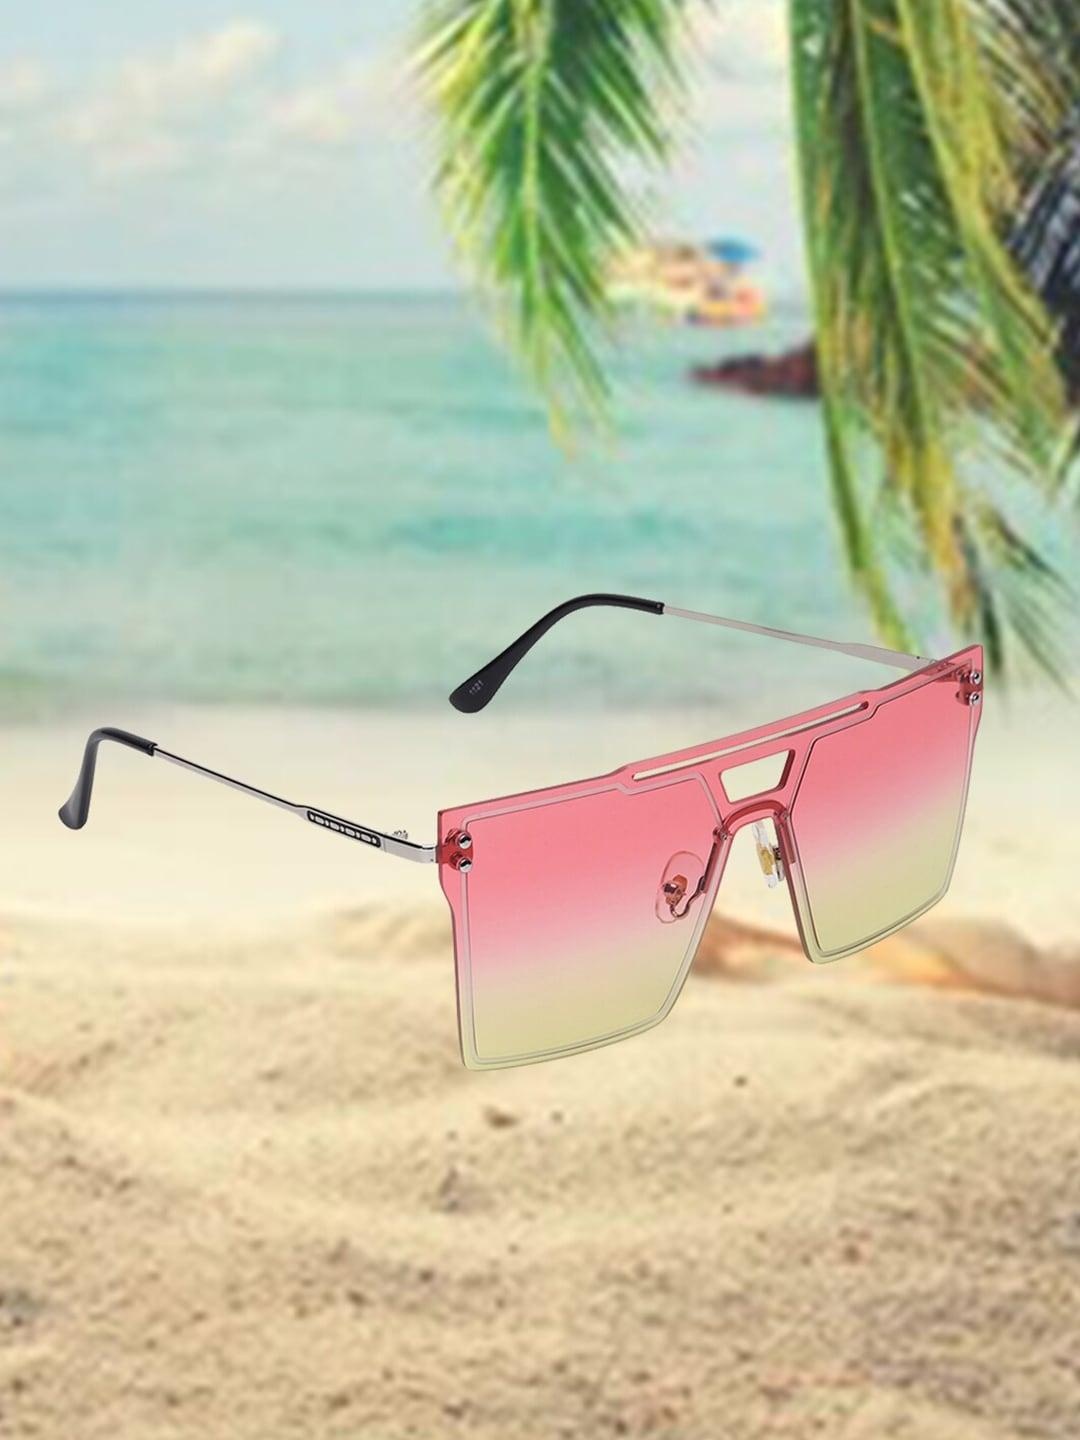 celebrity sunglasses square sunglasses with uv protected lens